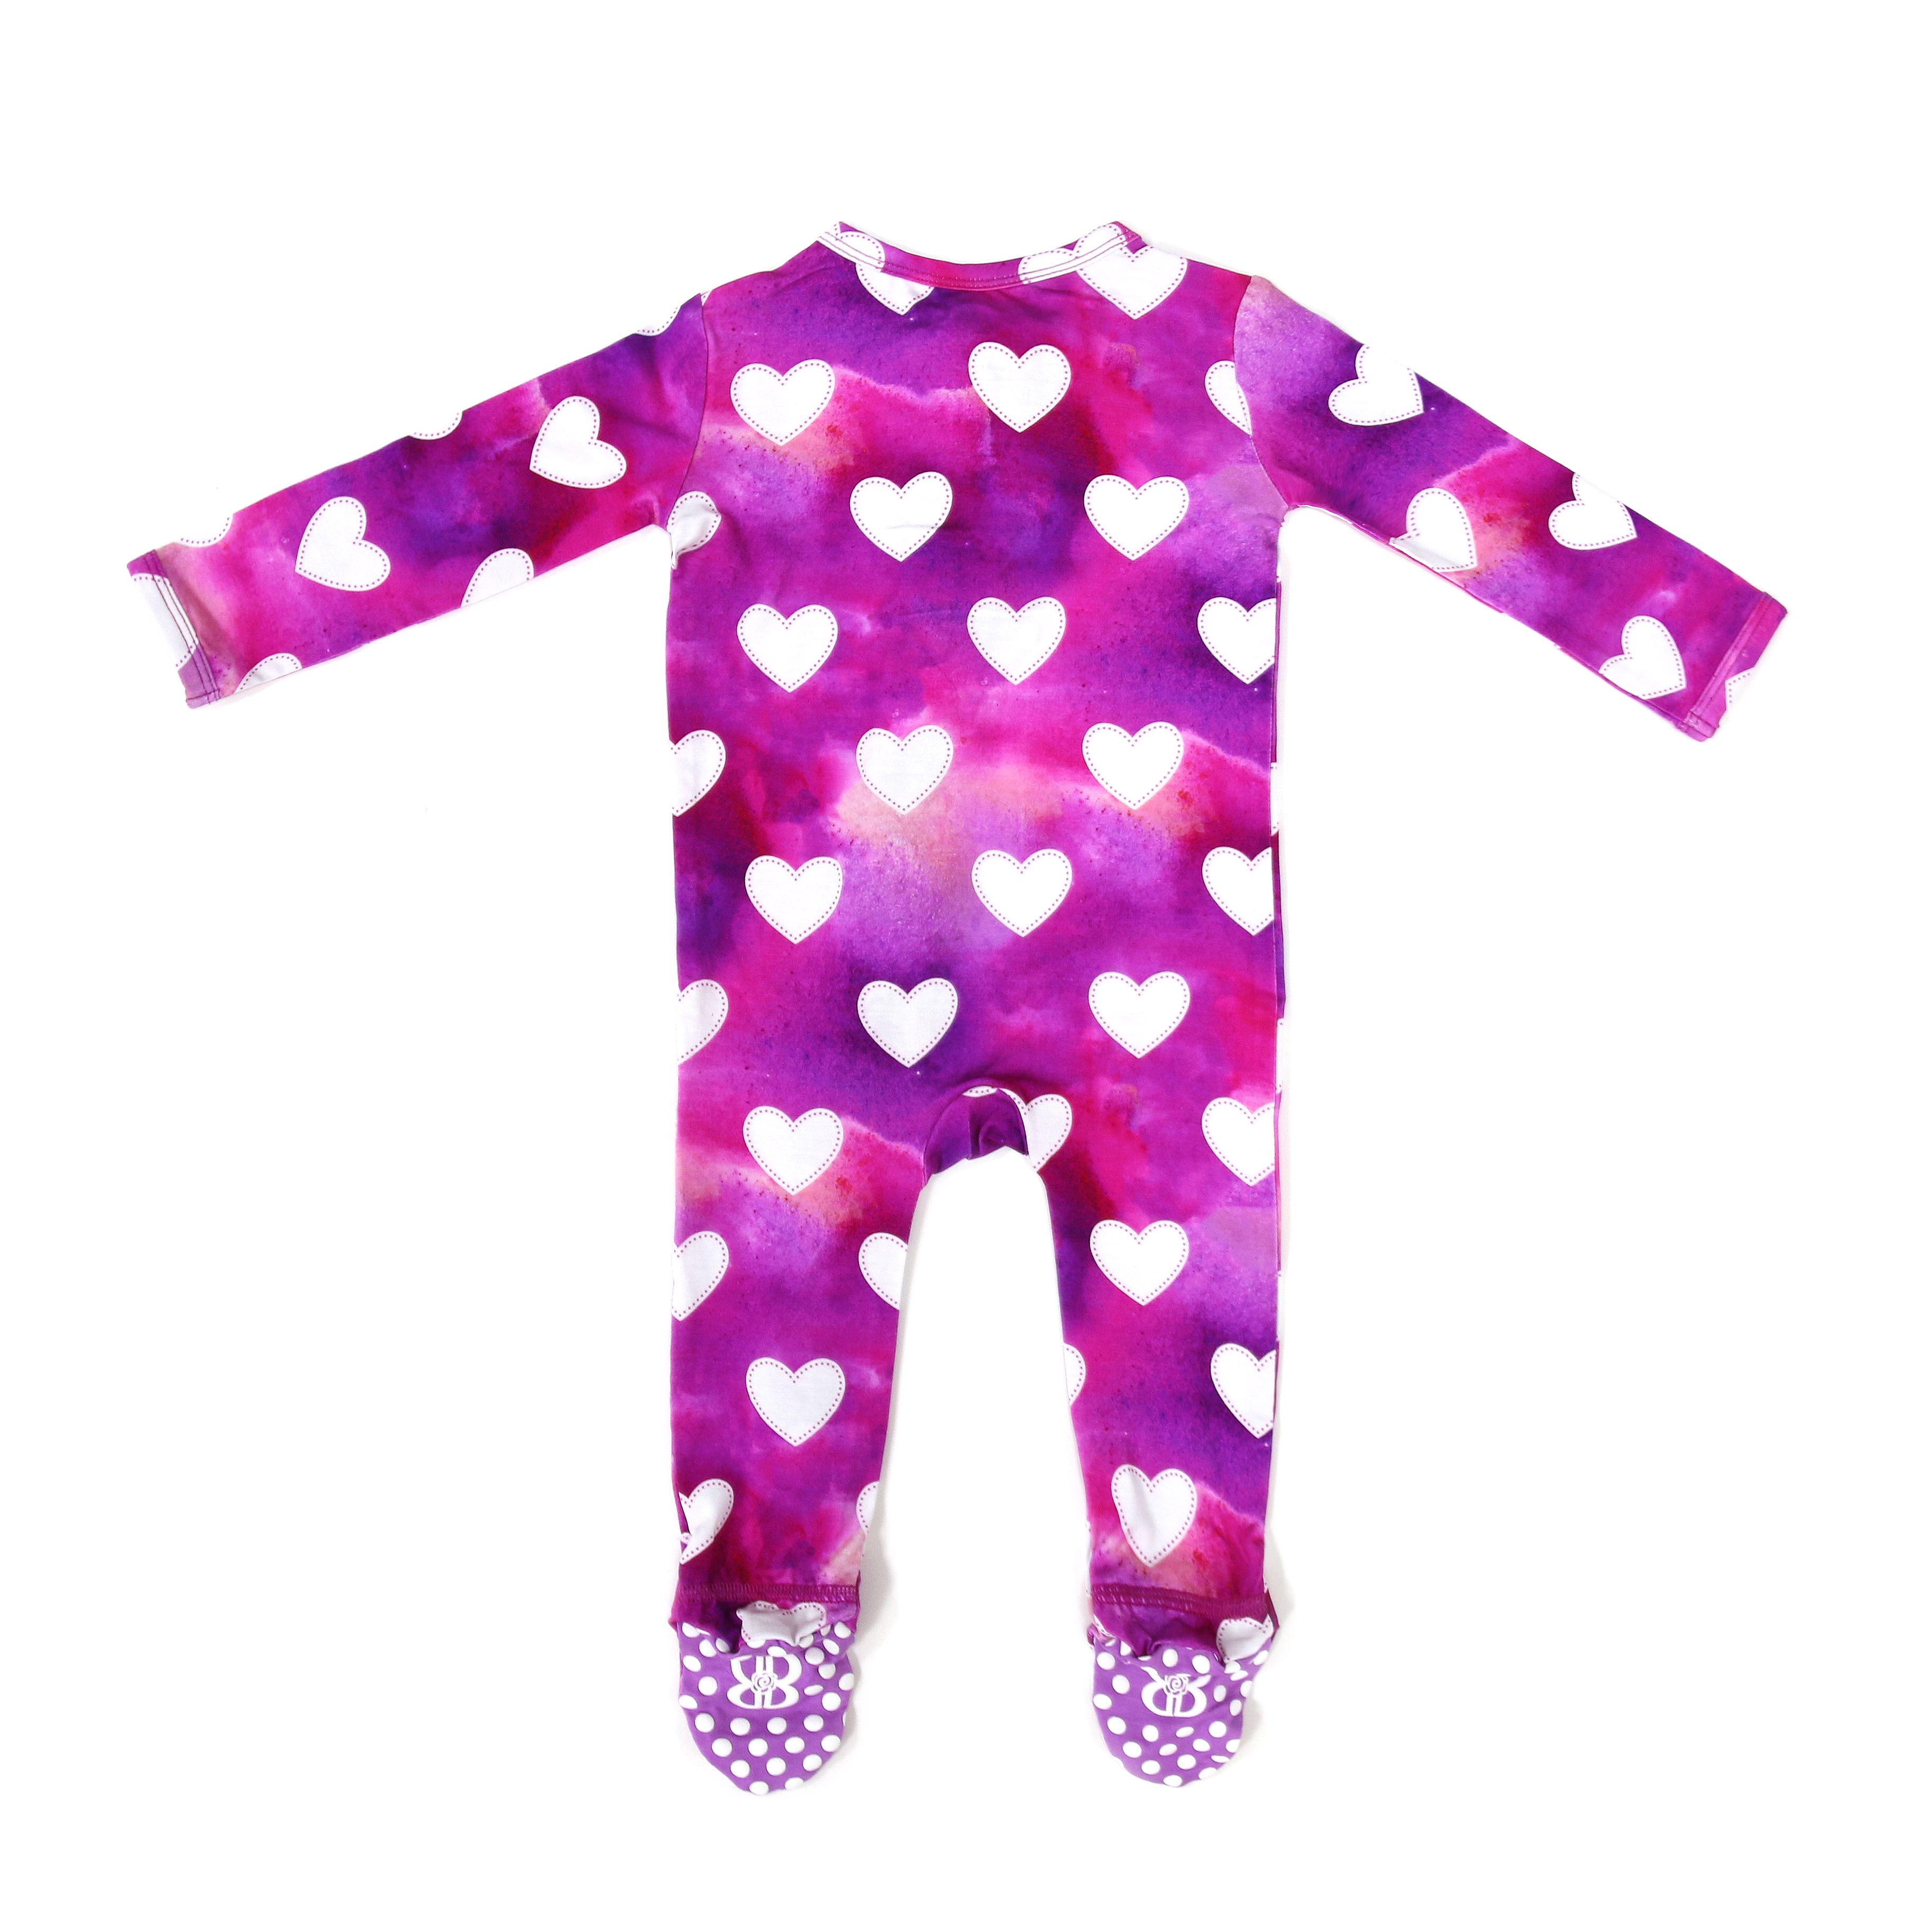 baby girl long sleeve bodysuits outfits ,pesonalized long sleeve baby girl outfit